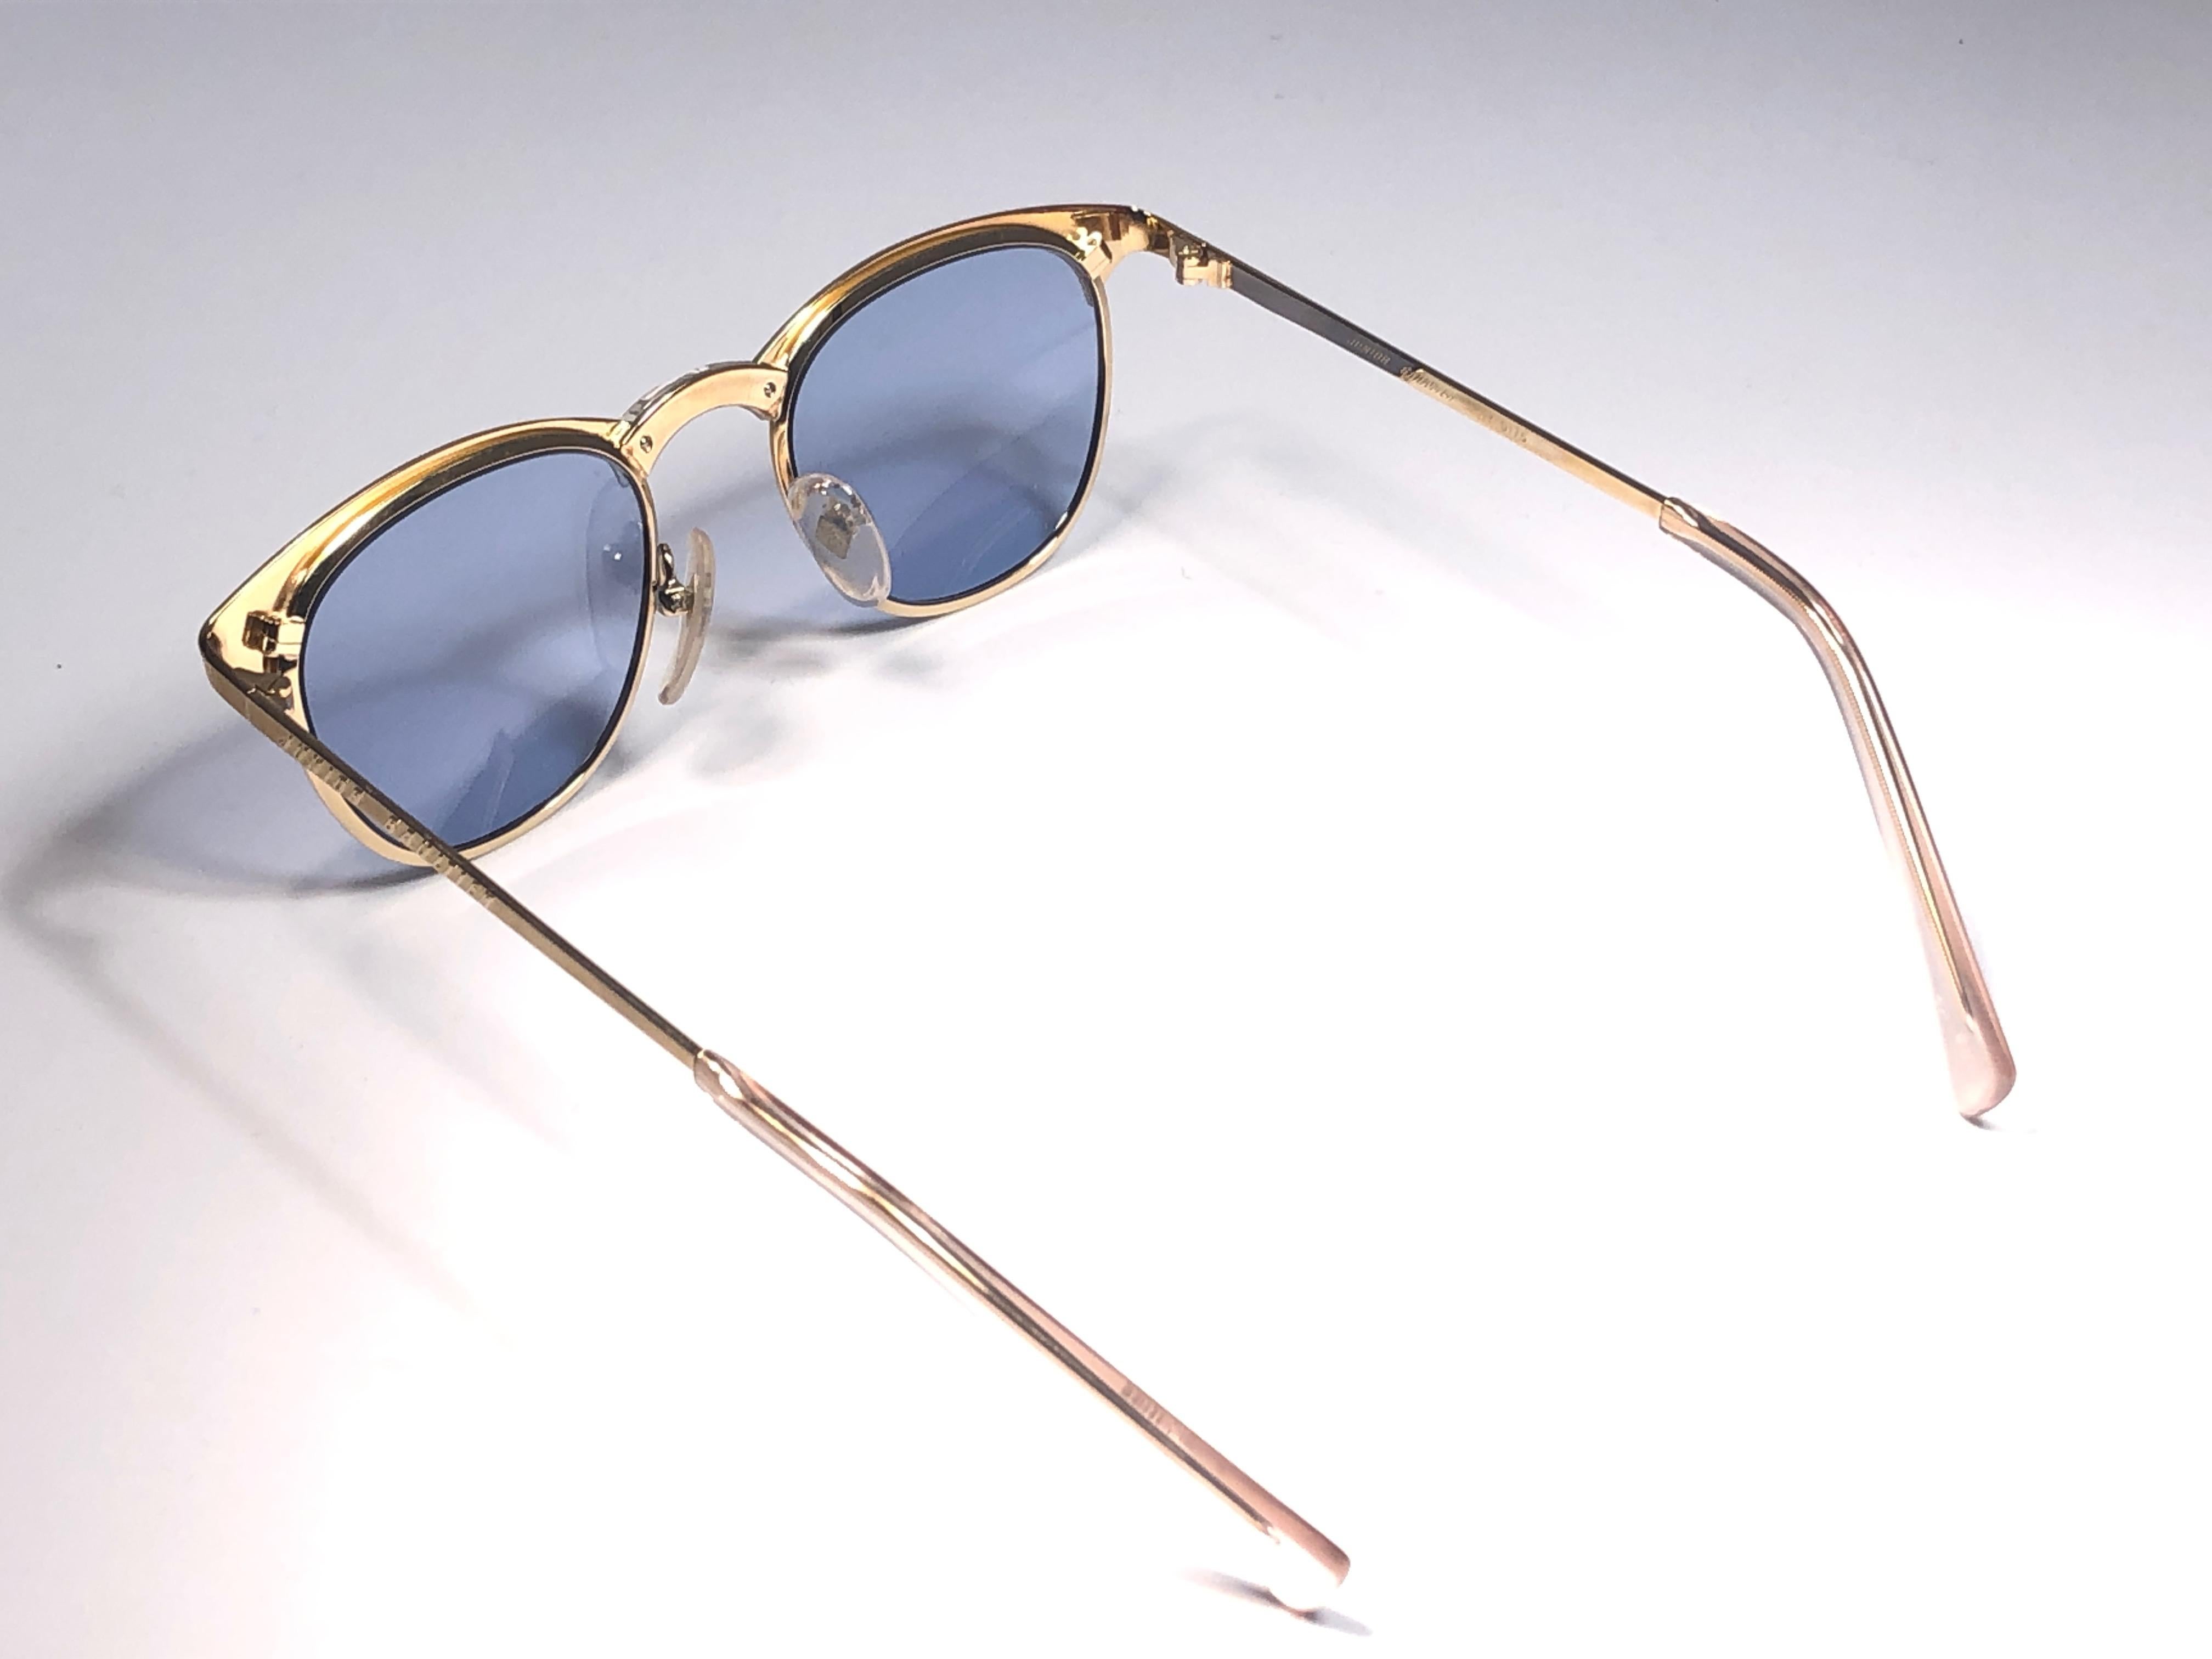 Women's or Men's New Jean Paul Gaultier 57 0175 Oval Gold Sunglasses 1990's Made in Japan 